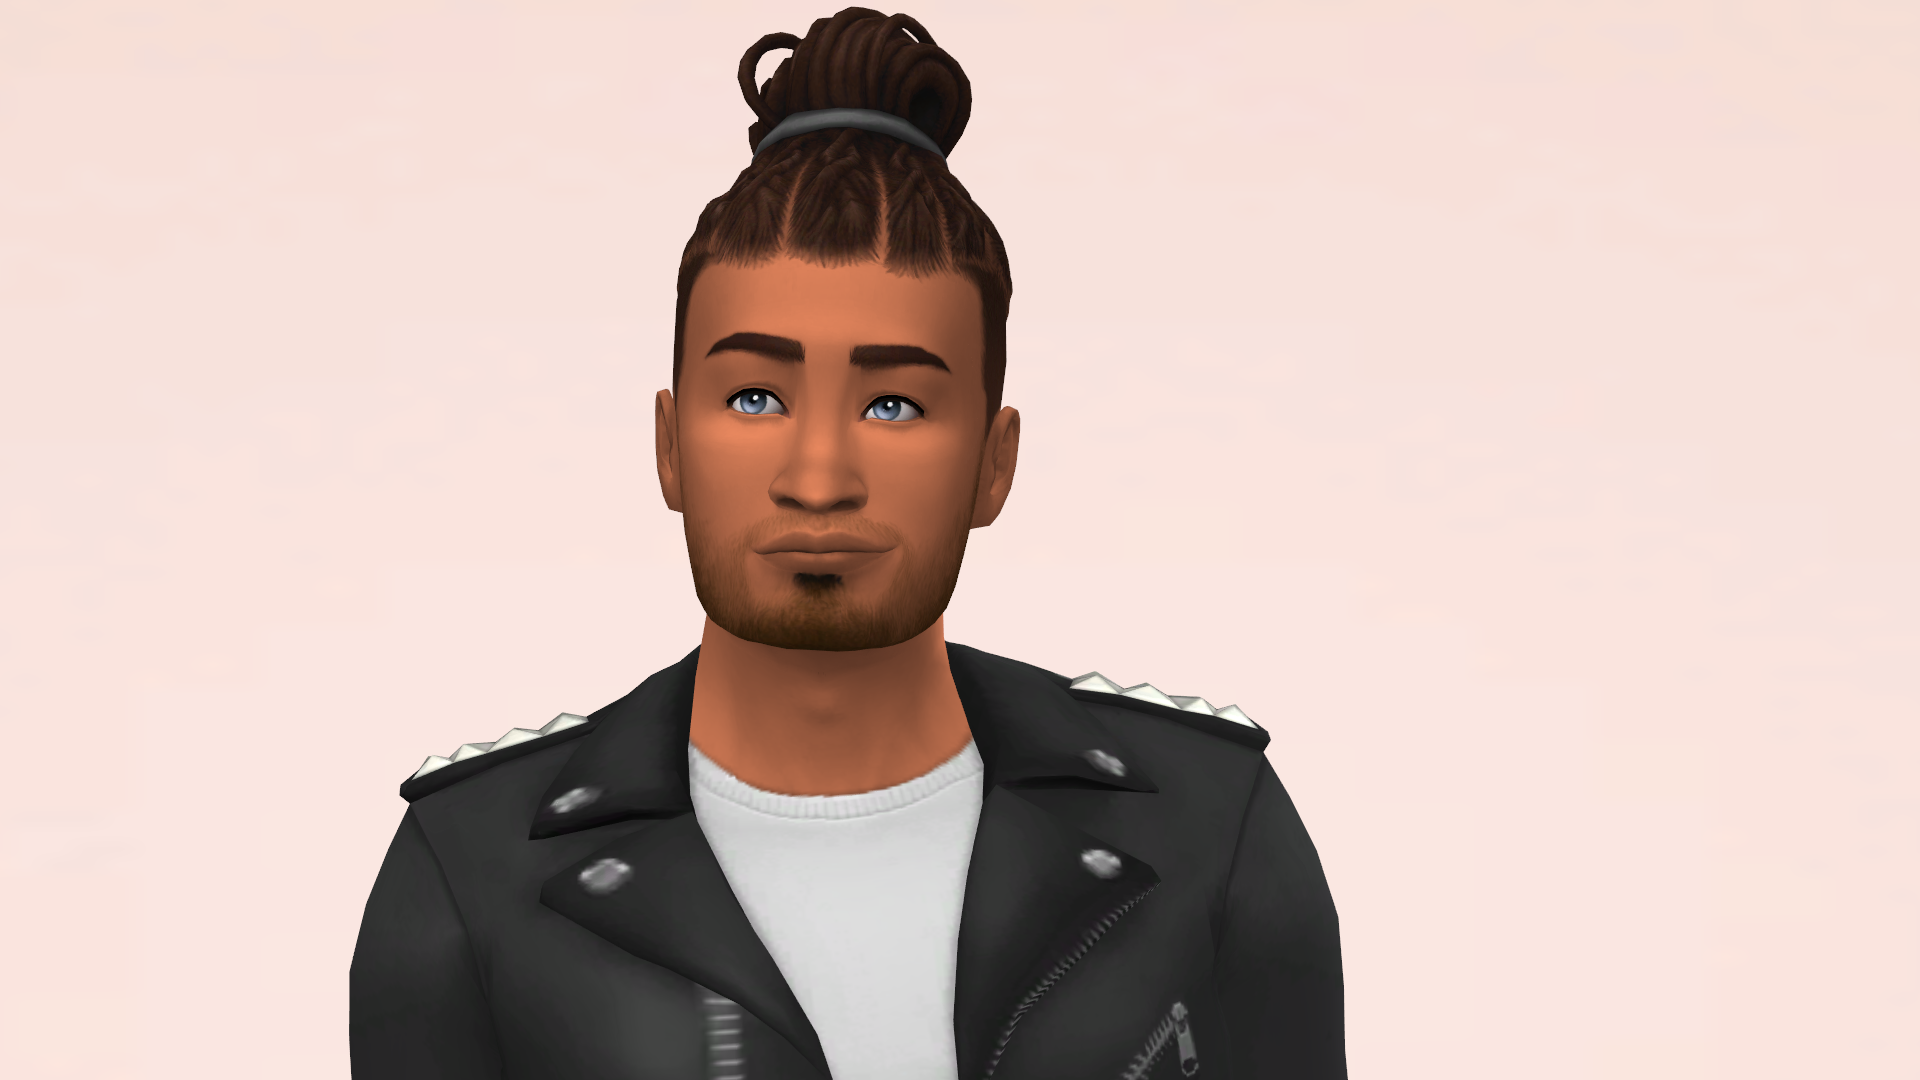 Sims 4 Male Braids Captions Graphic